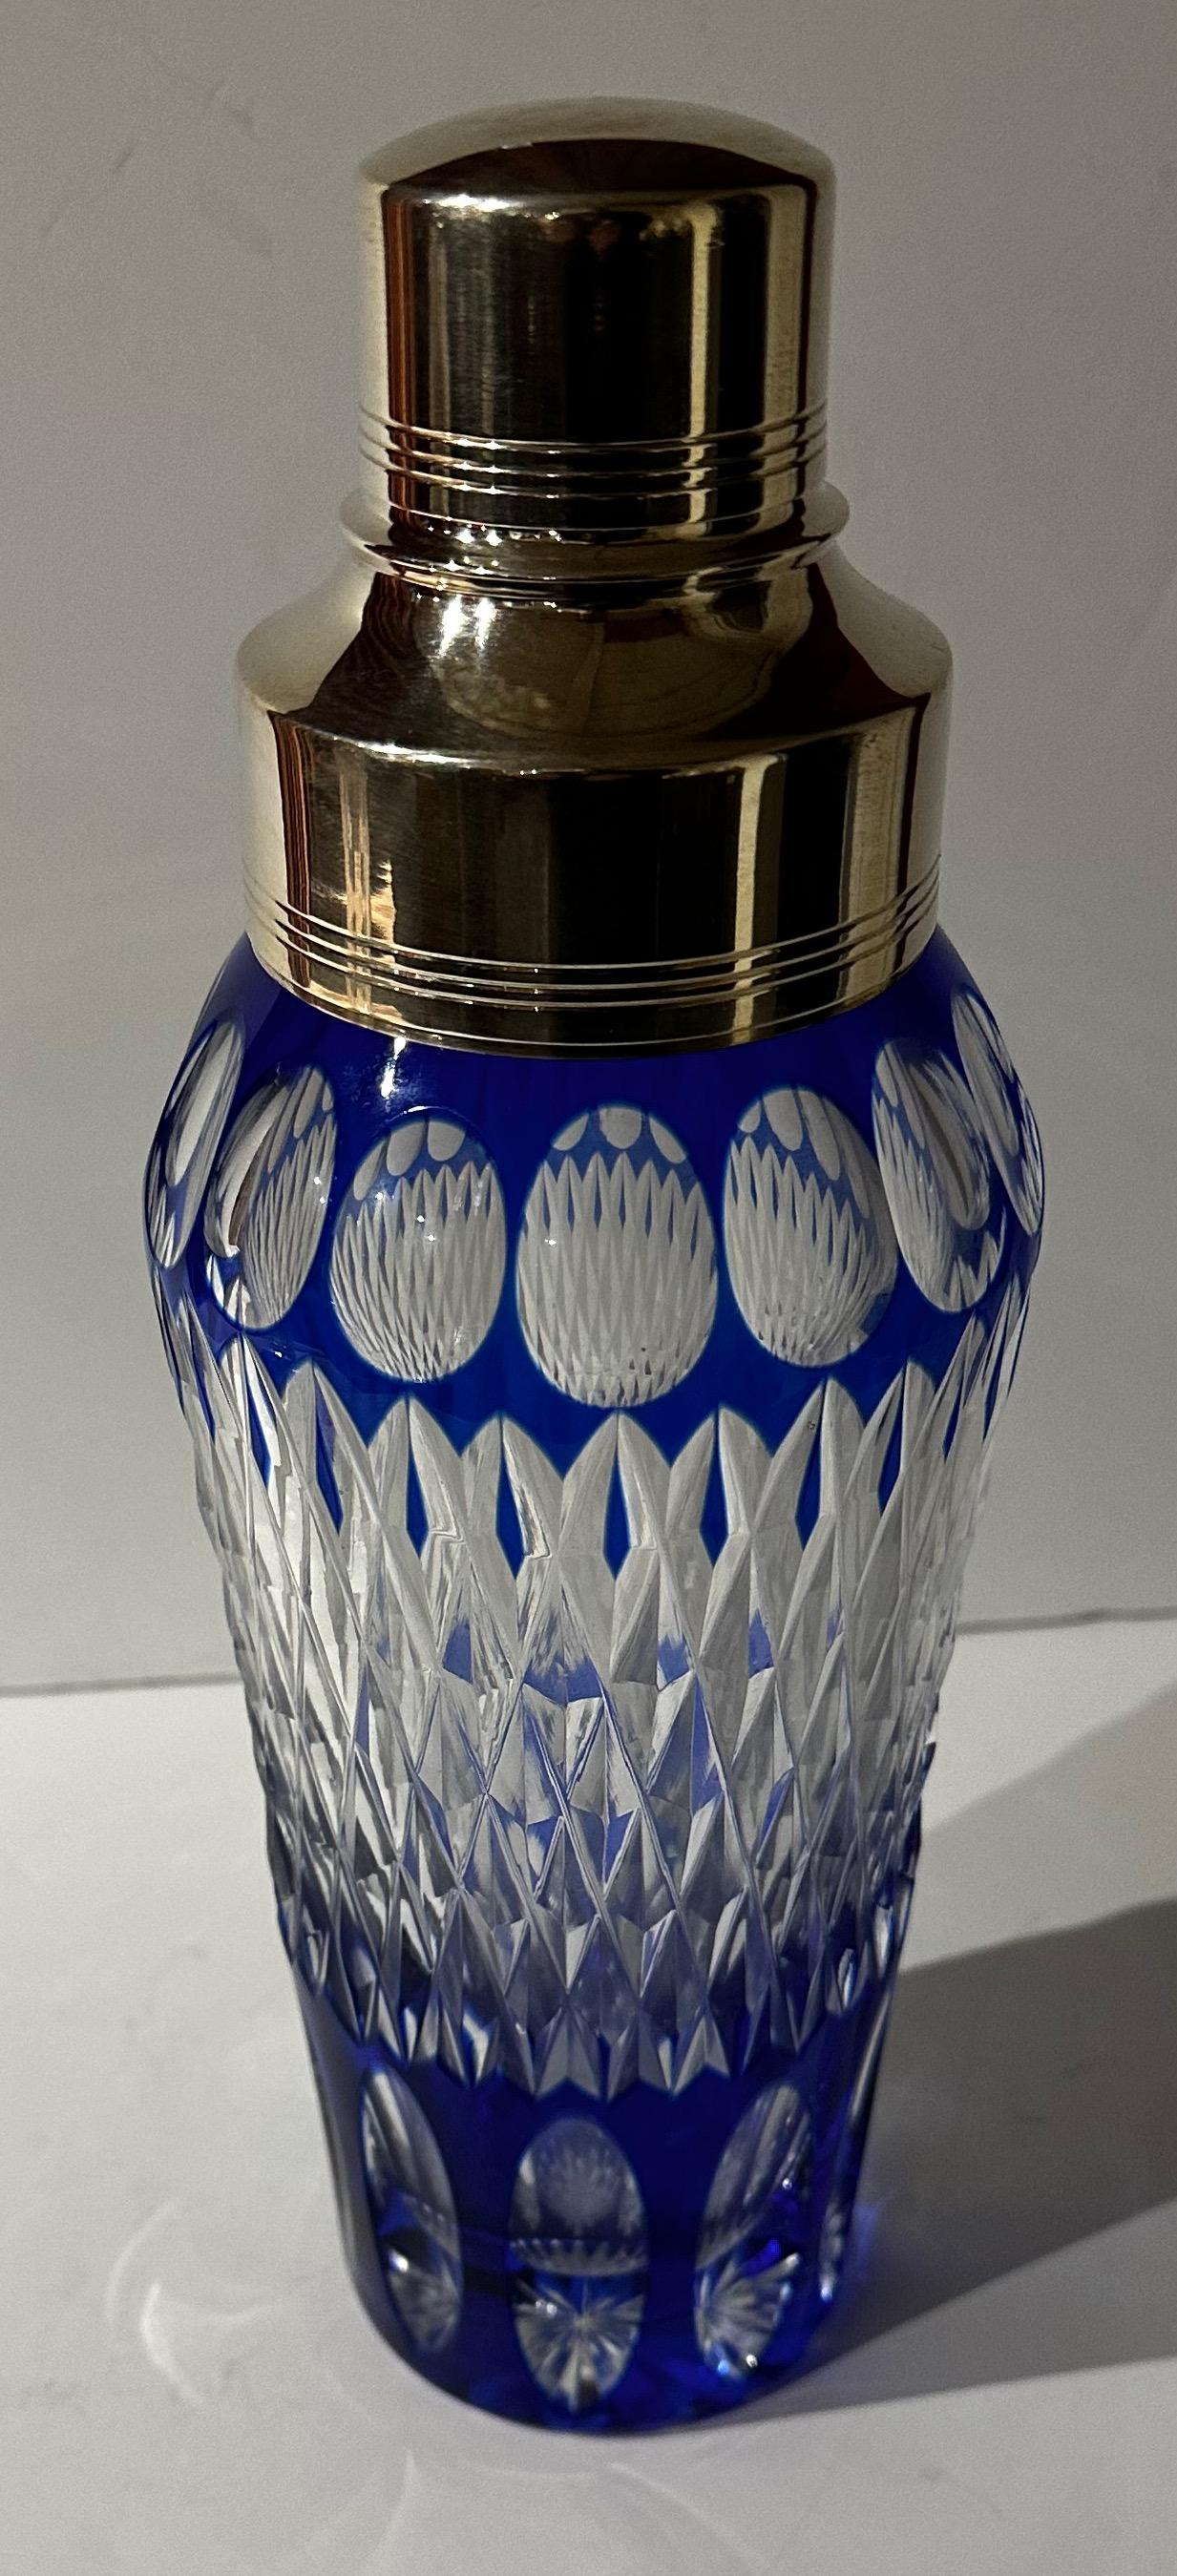 Art Deco Cocktail Shaker Martini Etched Carved Blue Glass Shaker For Sale